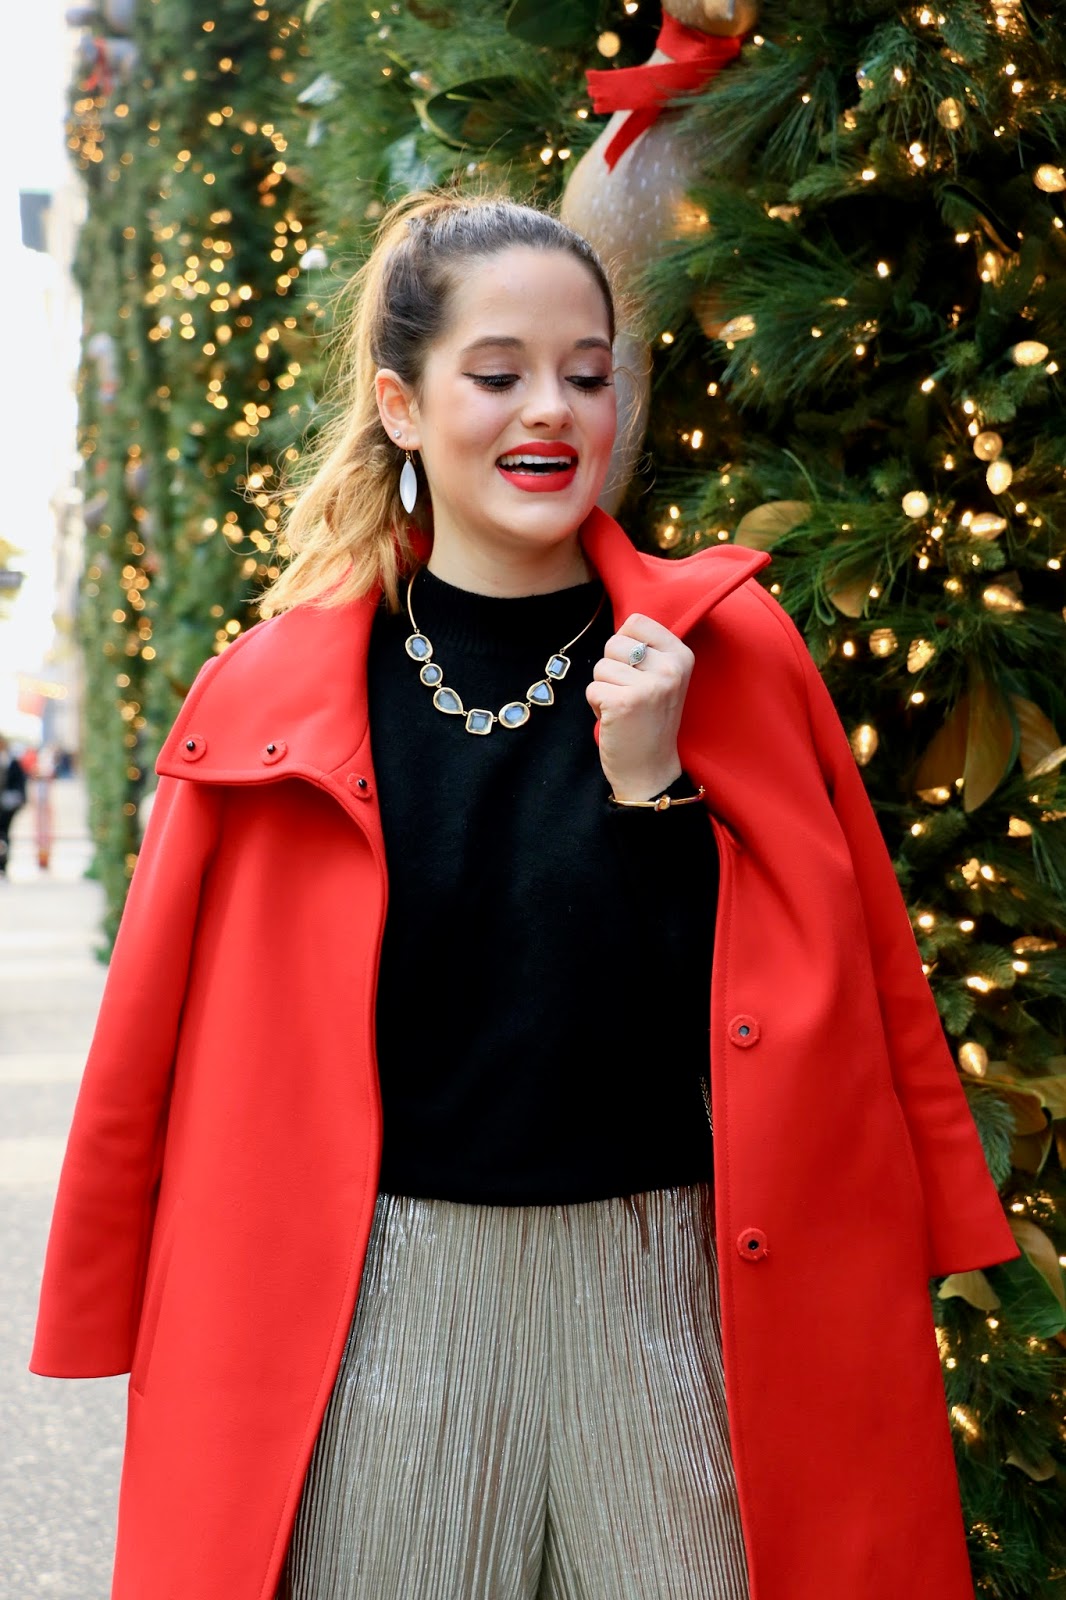 Nyc fashion blogger Kathleen Harper wearing a Christmas party outfit